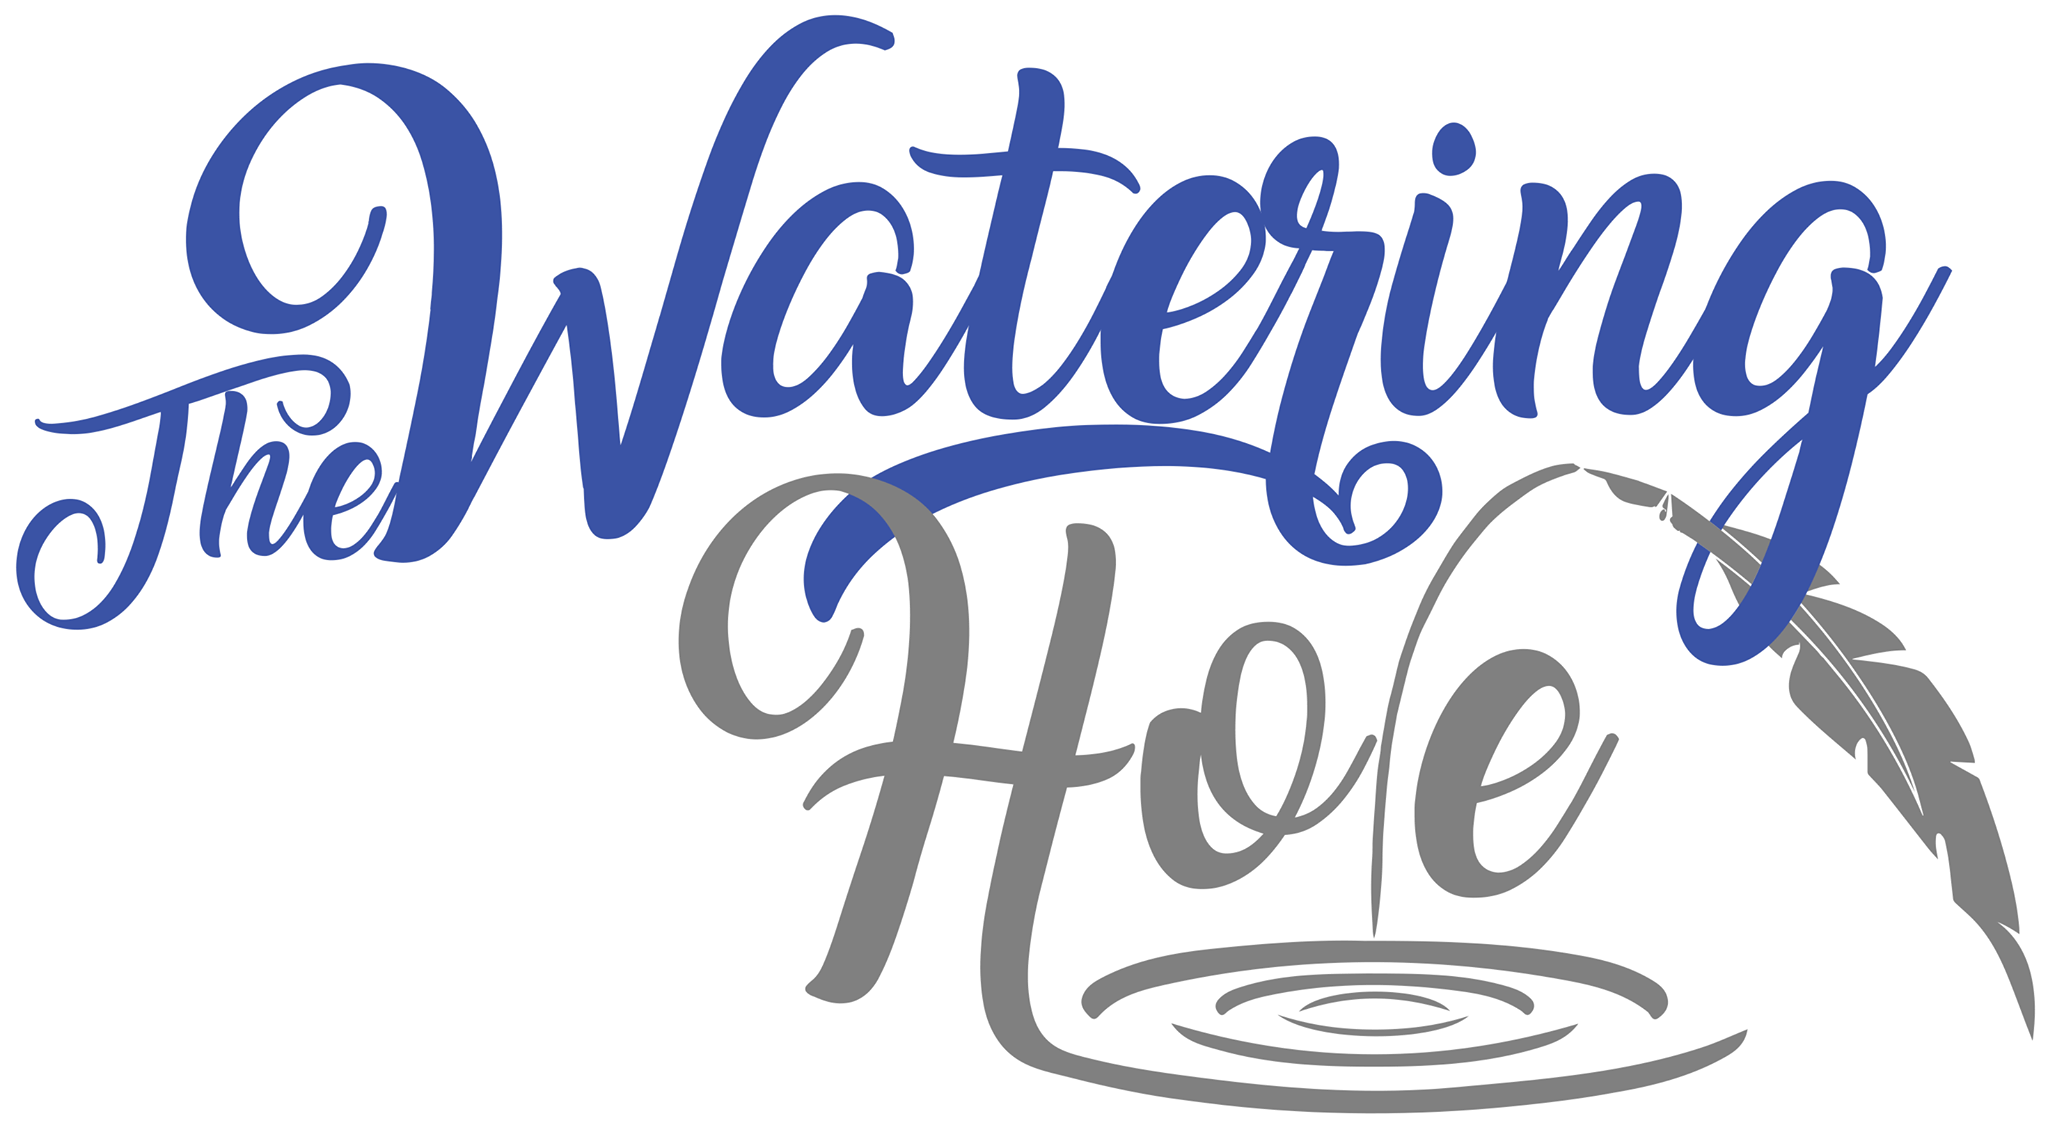 The Watering Hole $1,000 Poetry Slam